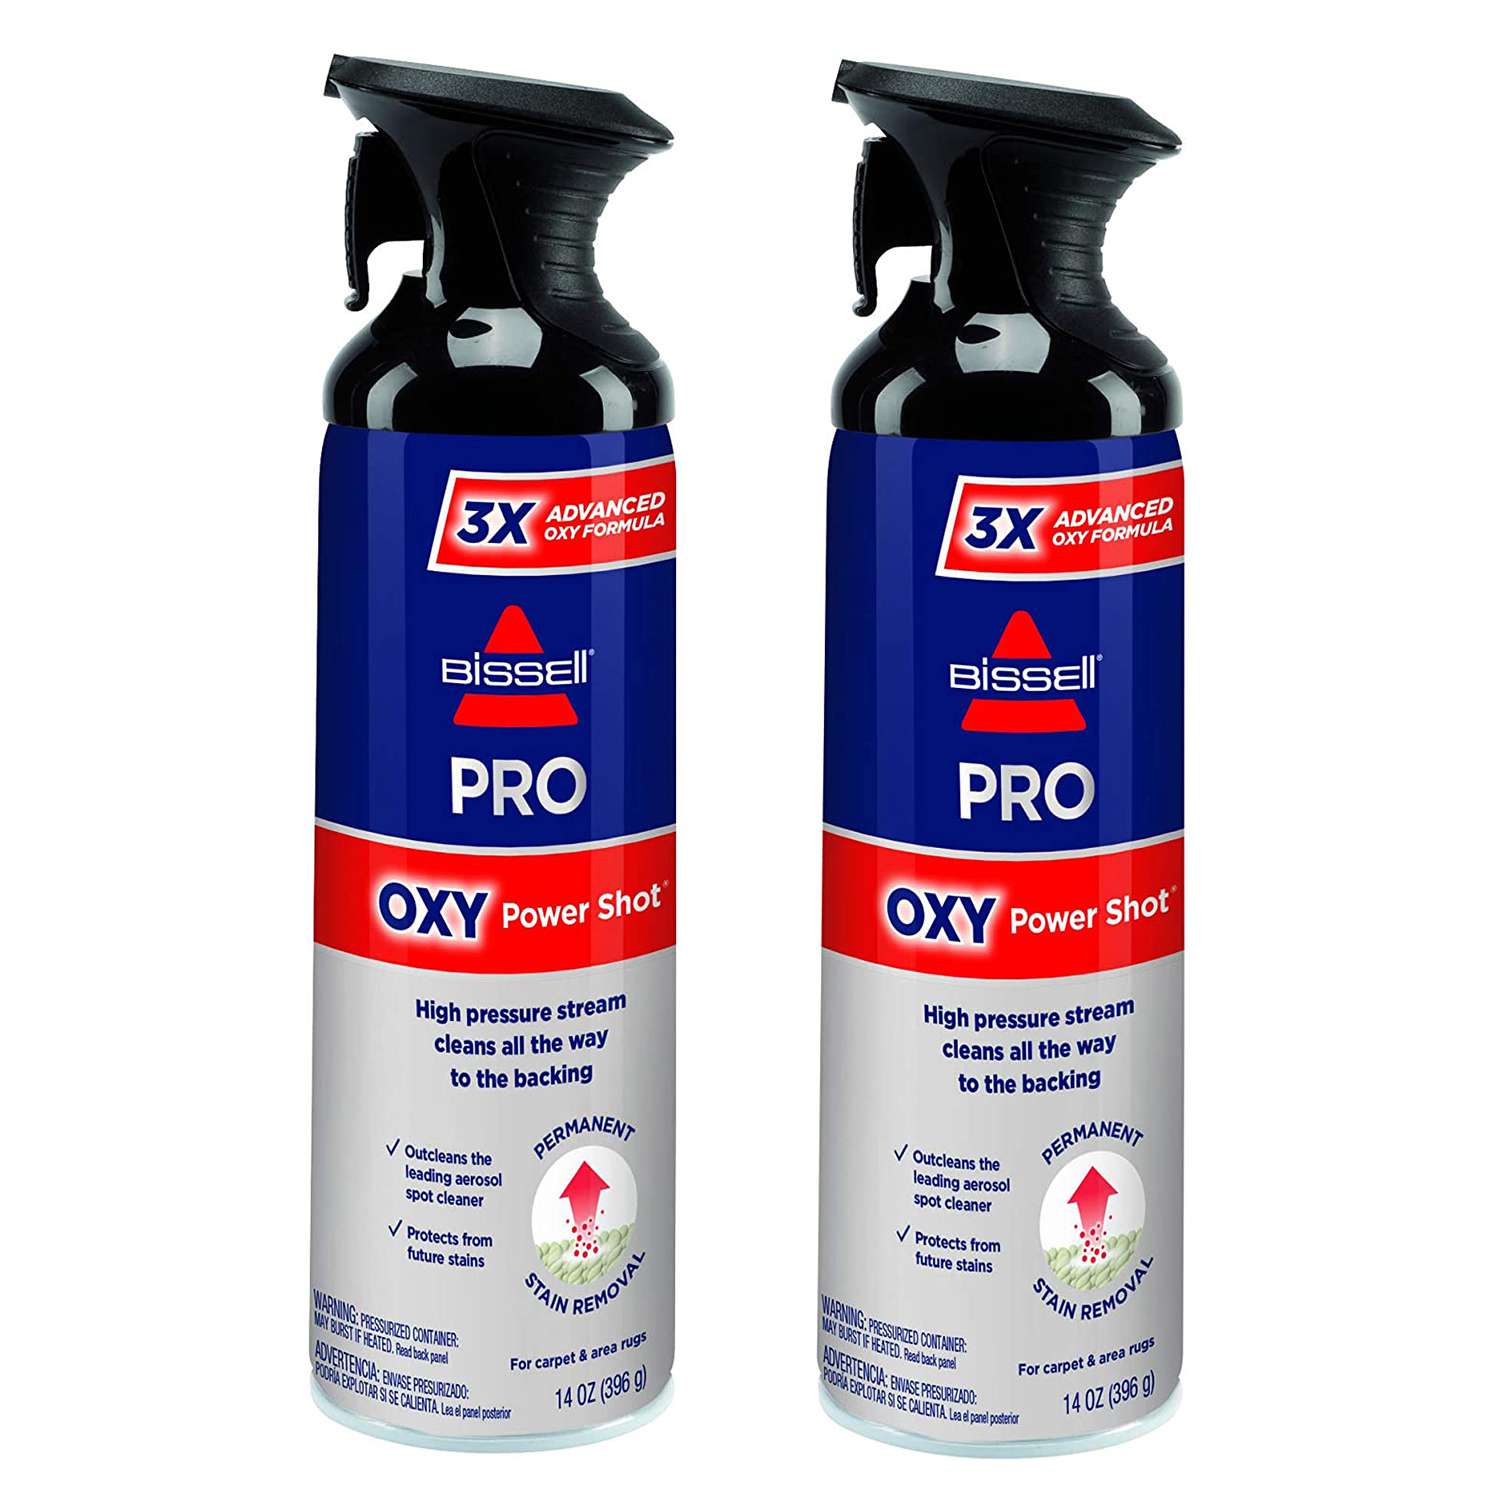 Bissell Professional Power Shot Oxy Carpet Spot